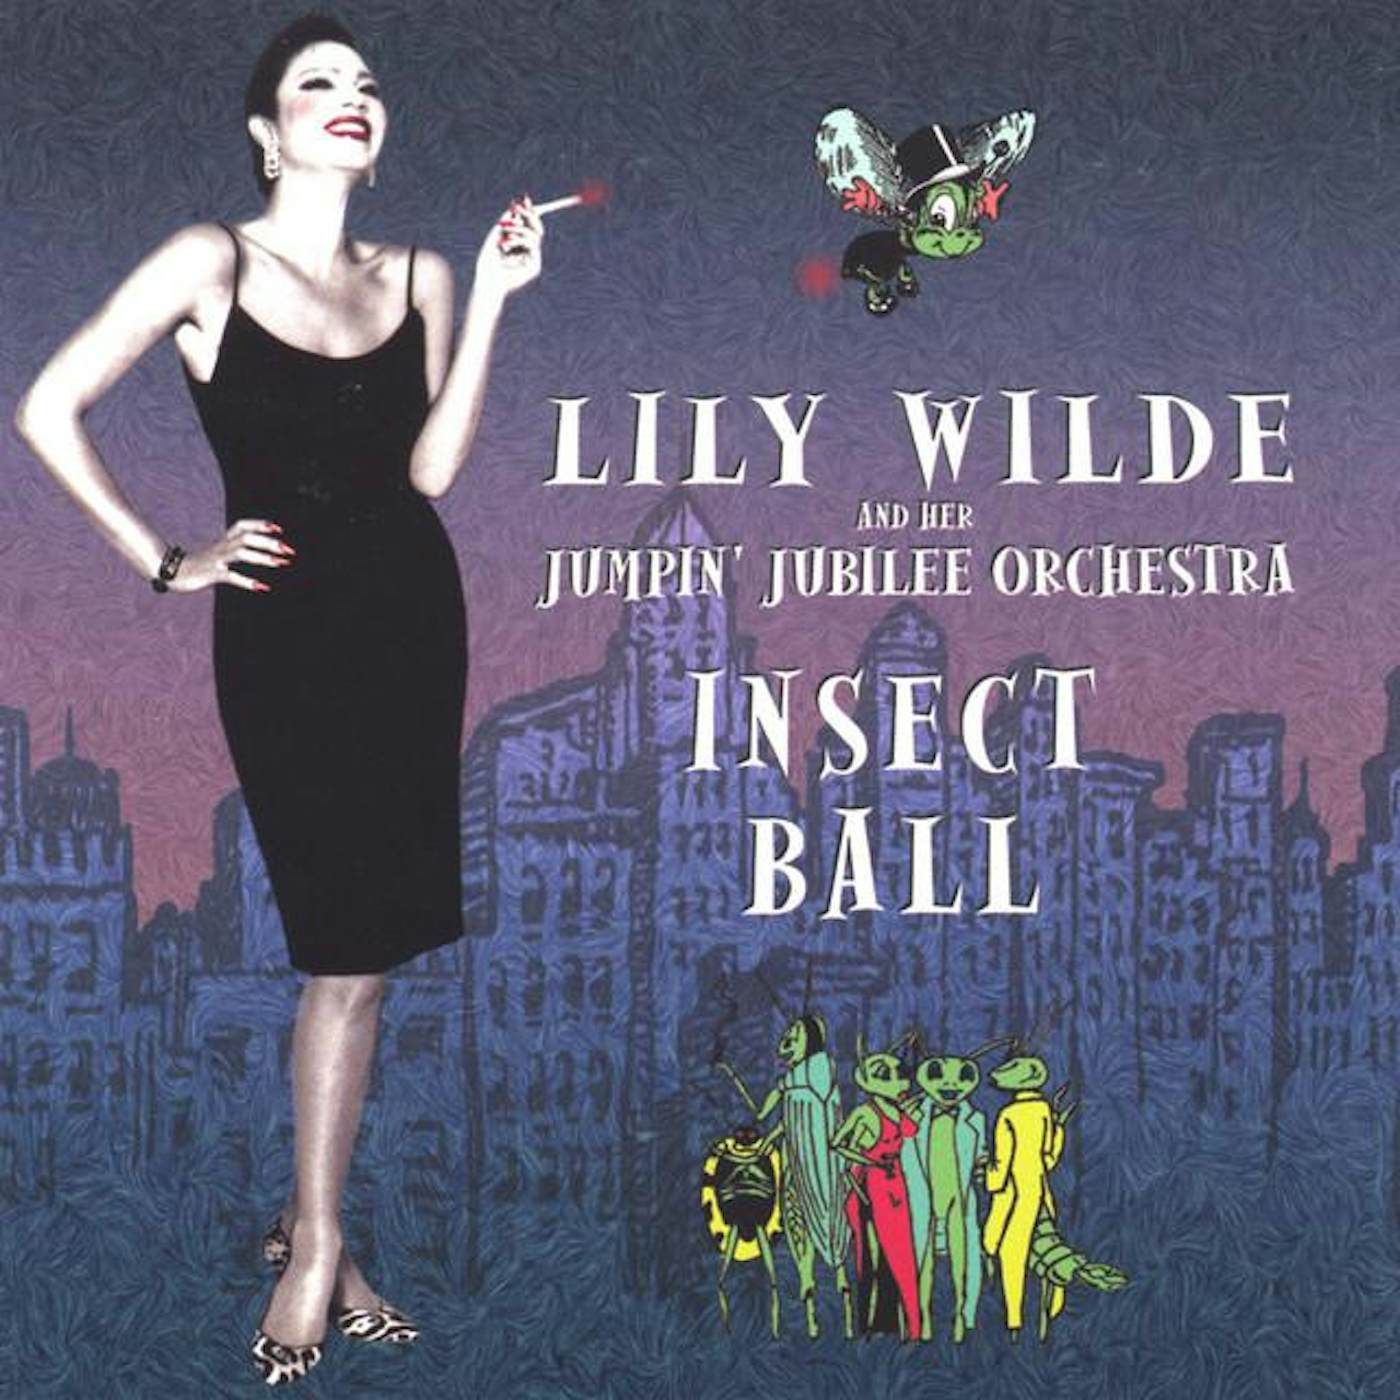 Lily Wilde and her Jumpin' Jubilee Orchestra